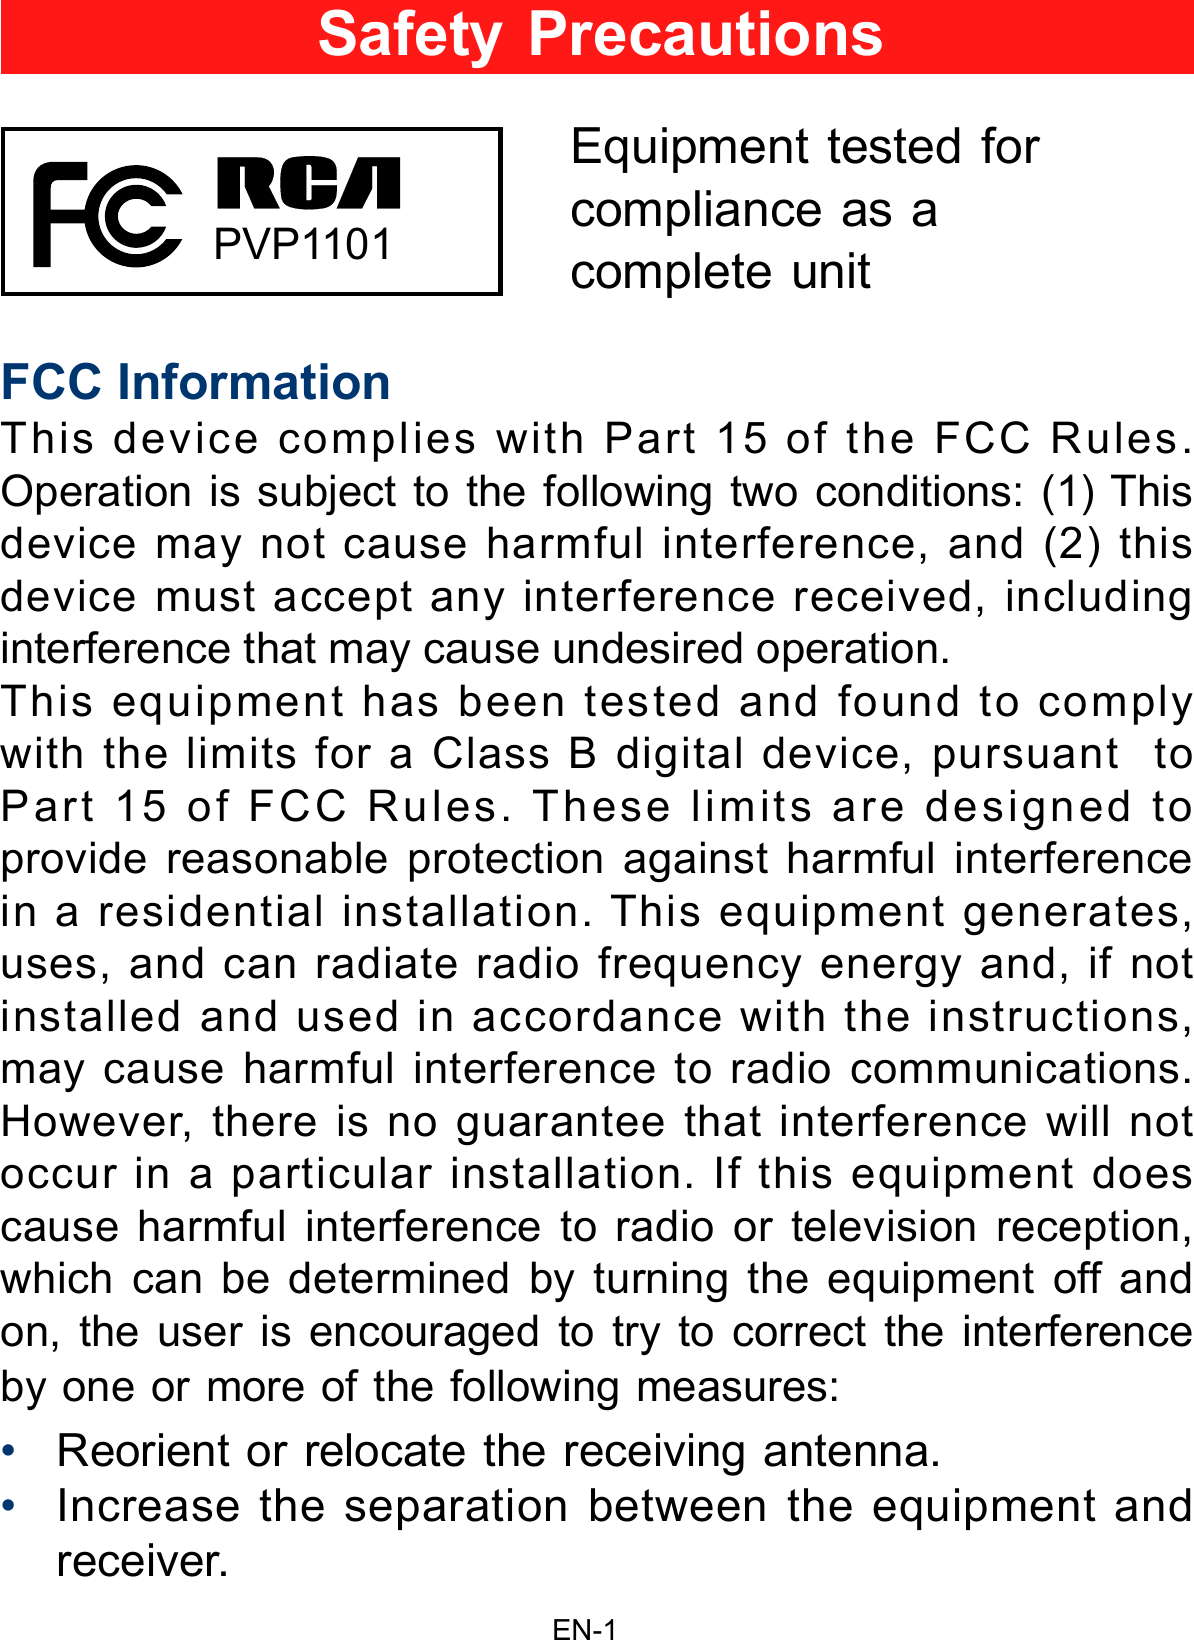 EN-1FCC InformationThis device complies with Part 15 of the FCC Rules. Operation is subject to the following two conditions: (1) This device may not cause harmful interference, and (2) this device must accept any interference received, including interference that may cause undesired operation.This equipment has been tested and found to comply with the limits for a Class B digital device, pursuant  to Part 15 of FCC Rules. These limits are designed to provide reasonable protection against harmful interference in a residential installation. This equipment generates, uses, and can radiate radio frequency energy and, if not installed and used in accordance with the instructions, may cause harmful interference to radio communications.However, there is no guarantee that interference will not occur in a particular installation. If this equipment does cause harmful interference to radio or television reception, which can be determined by turning the equipment off and on, the user is encouraged to try to correct the interference by one or more of the following measures:•Reorient or relocate the receiving antenna.•Increase the separation between the equipment andreceiver.Safety PrecautionsEquipment tested forcompliance as acomplete unit  PVP1101